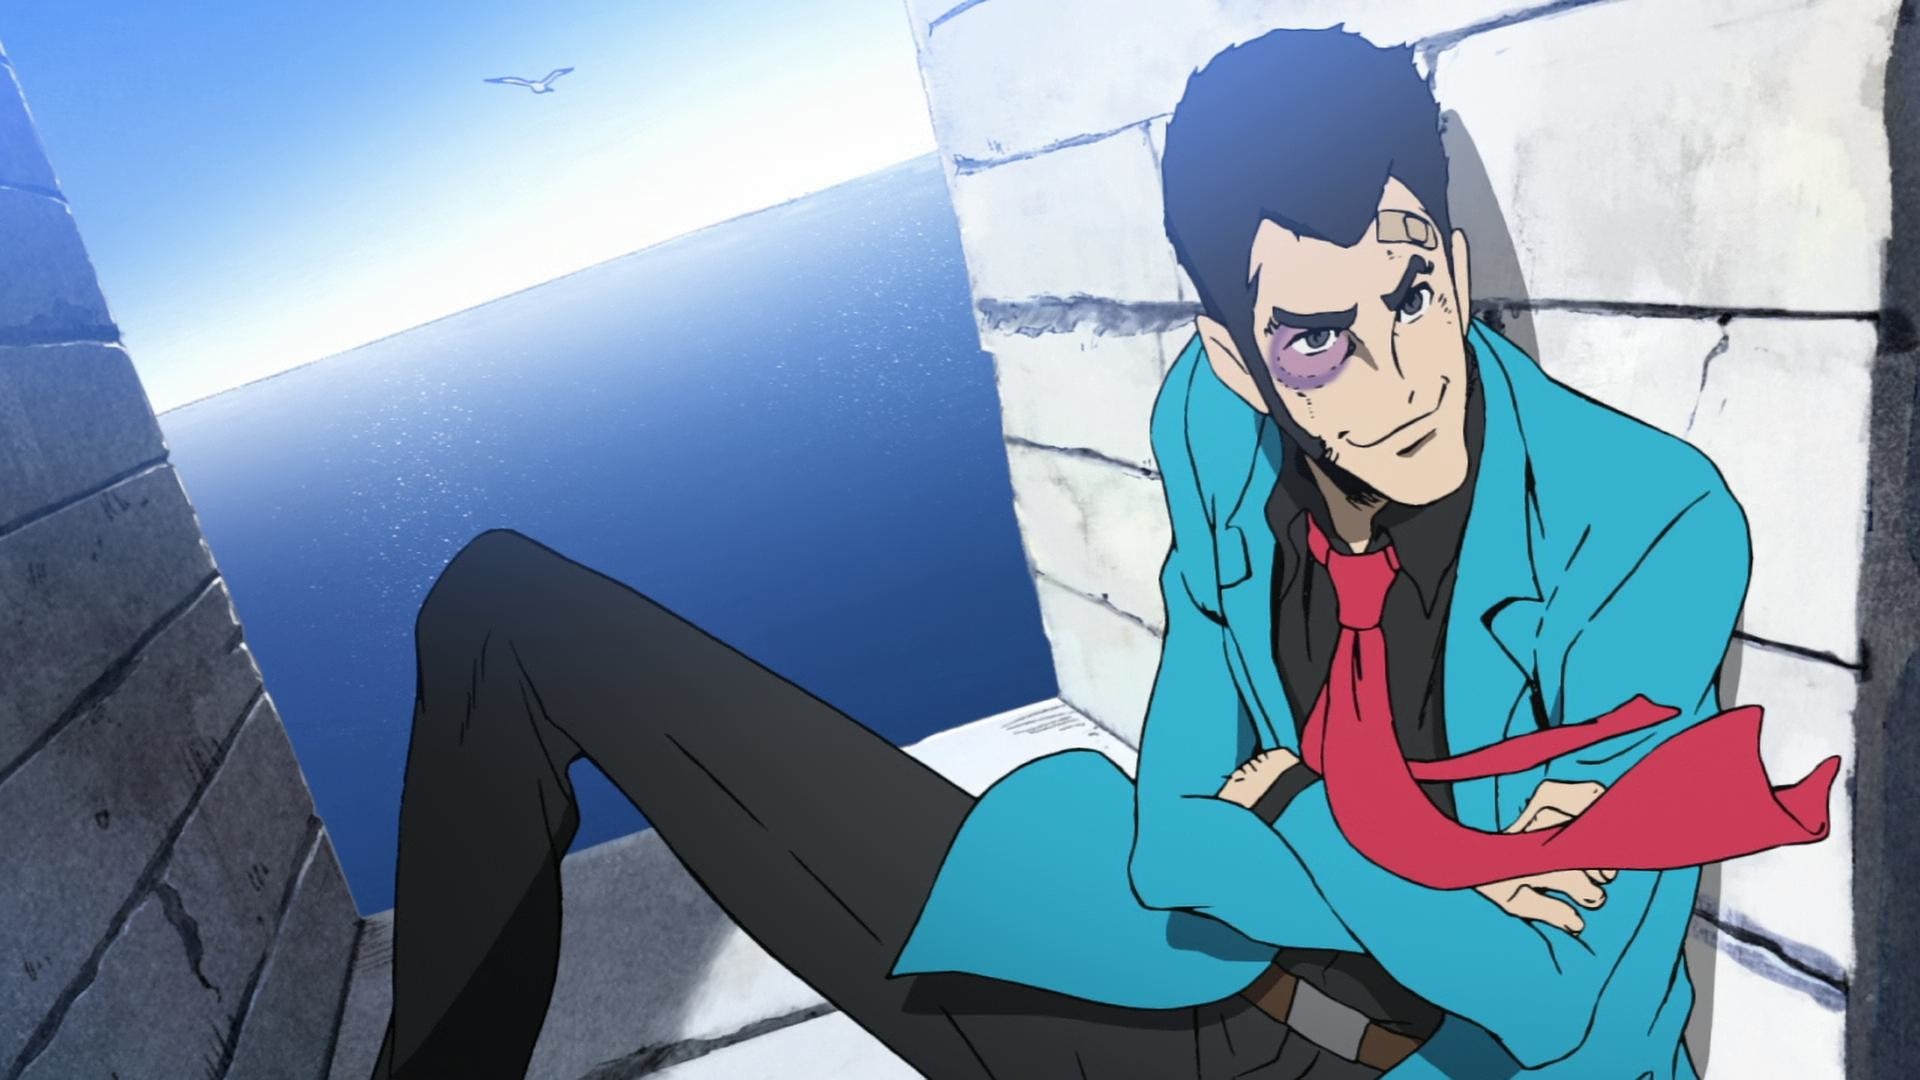 Lupin the Third has crossed paths with some real weirdos.